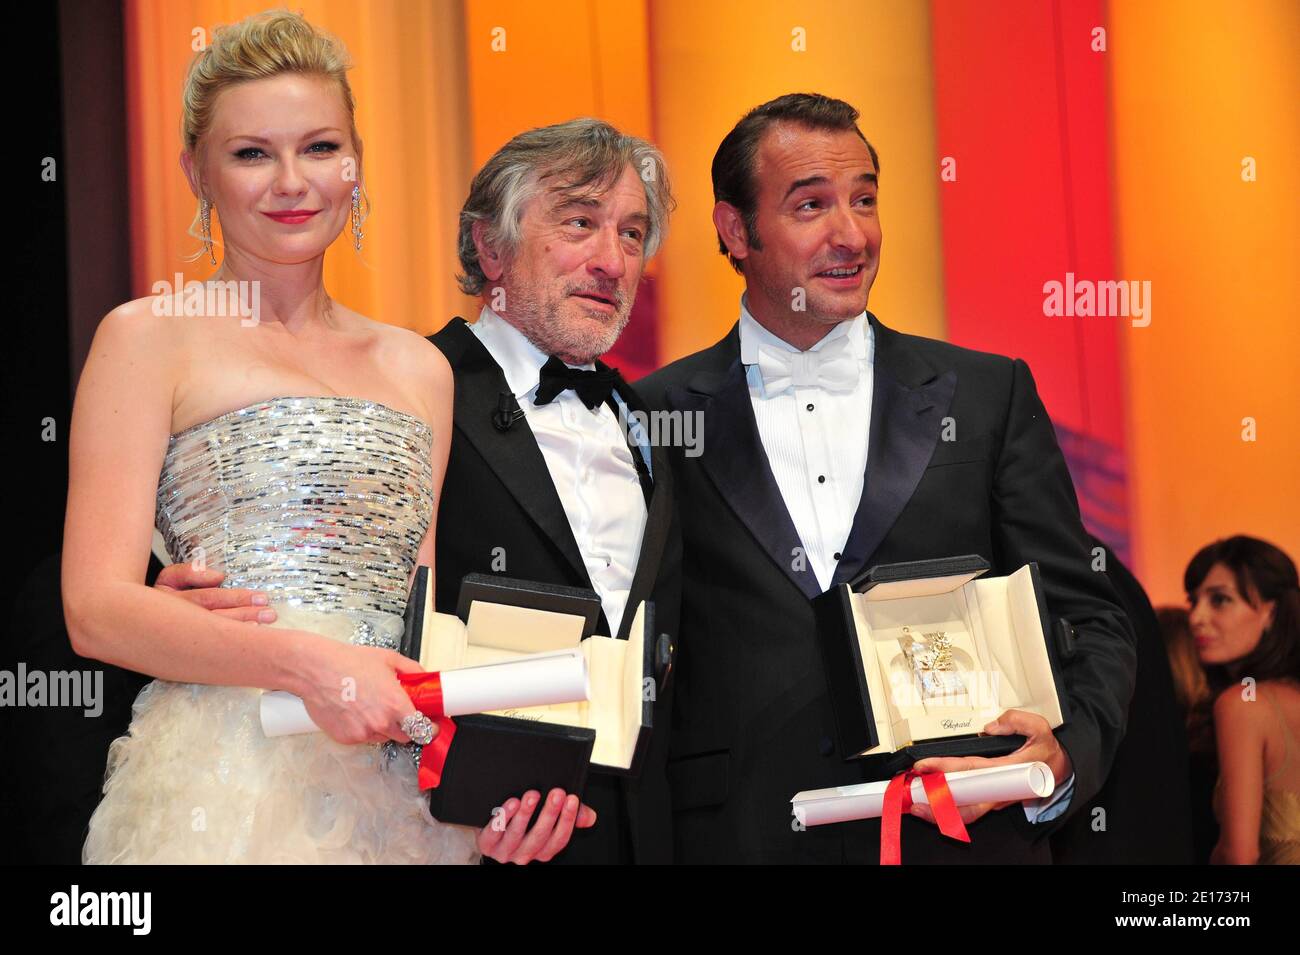 L-R) Kirsten Dunst (Best Performance by an Actress), Jury President Robert  De Niro and Jean Dujardin (Best Performance by an Actor) during the Awards  ceremony of the 64th Cannes International Film Festival,